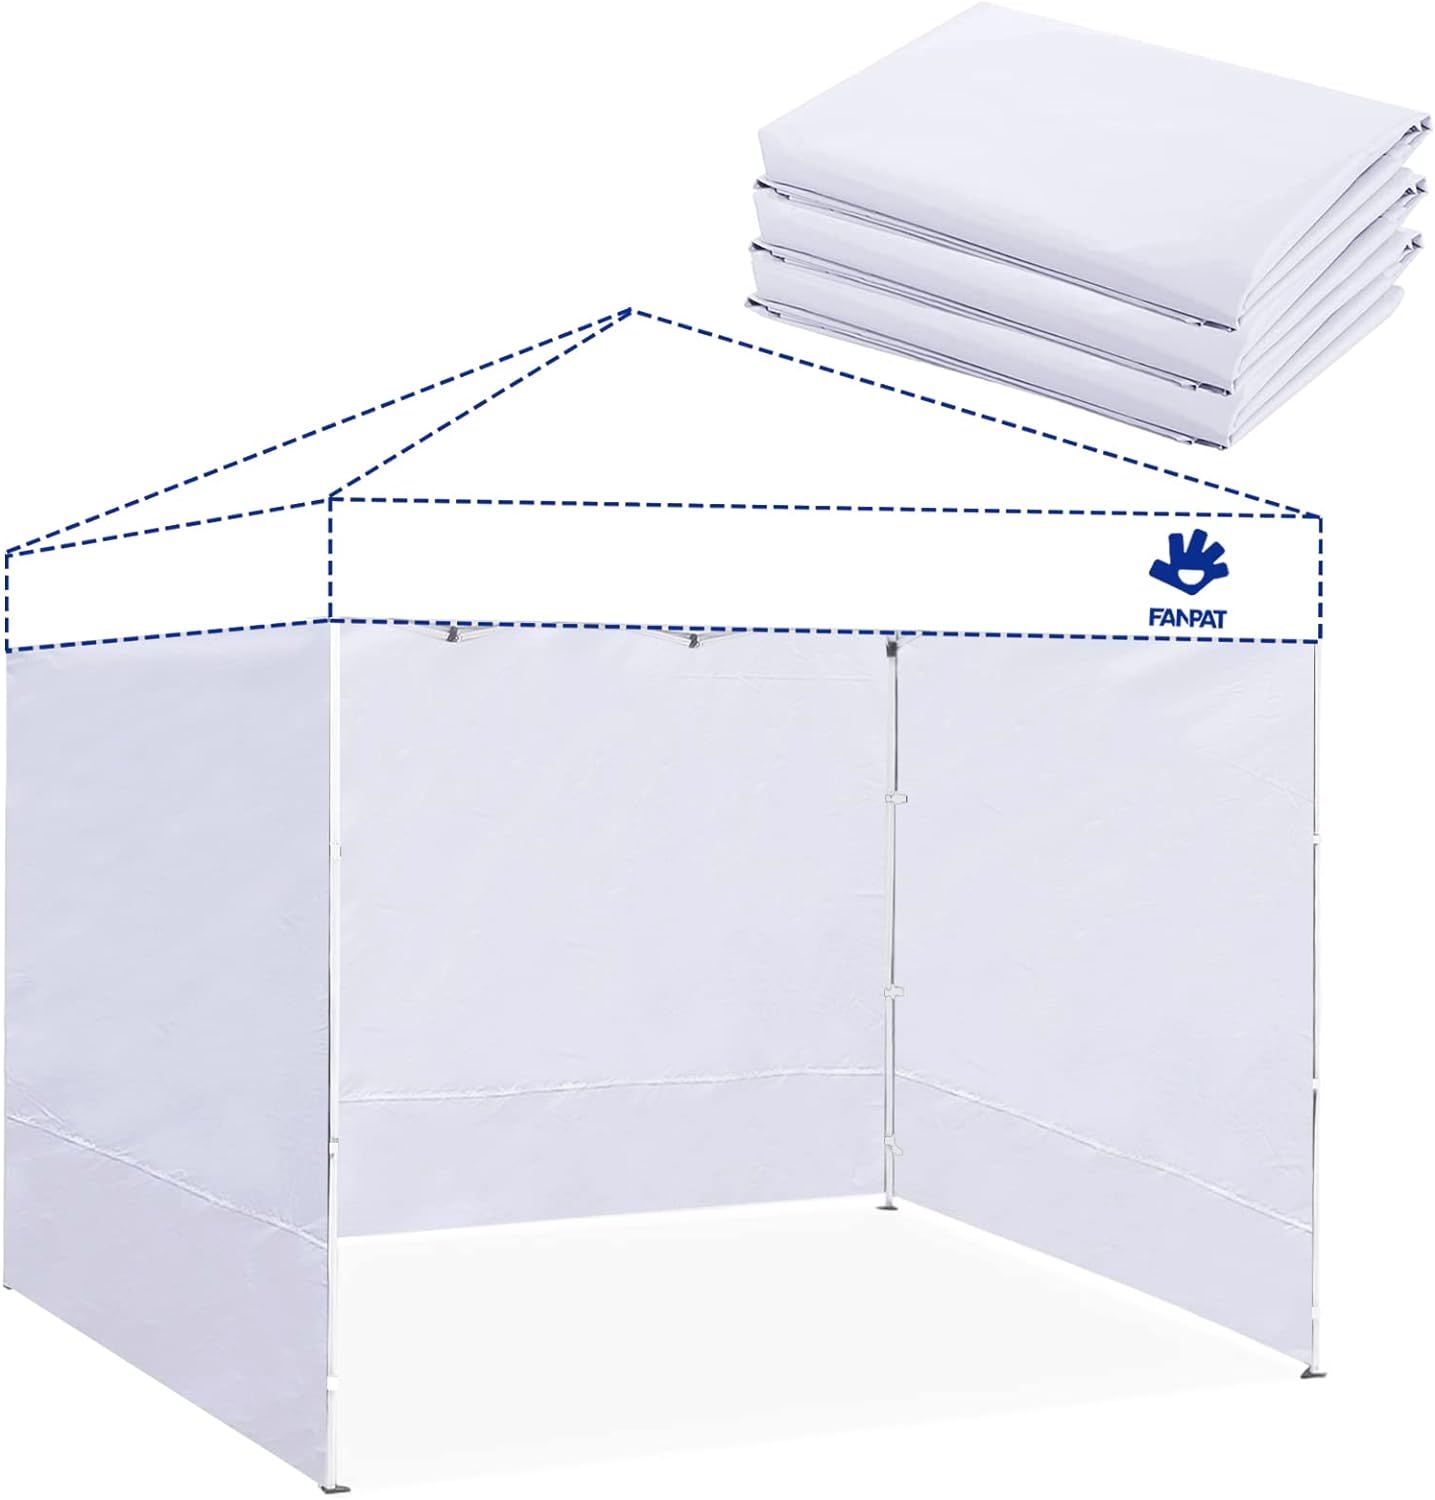 Instant Canopy Tent Sidewalls for 10x10 Pop Up Canopy Waterproof,99% UV Protection3 Piece Sidewalls, White(3PCS Sidewall Only, Canopy Tent NOT Included)